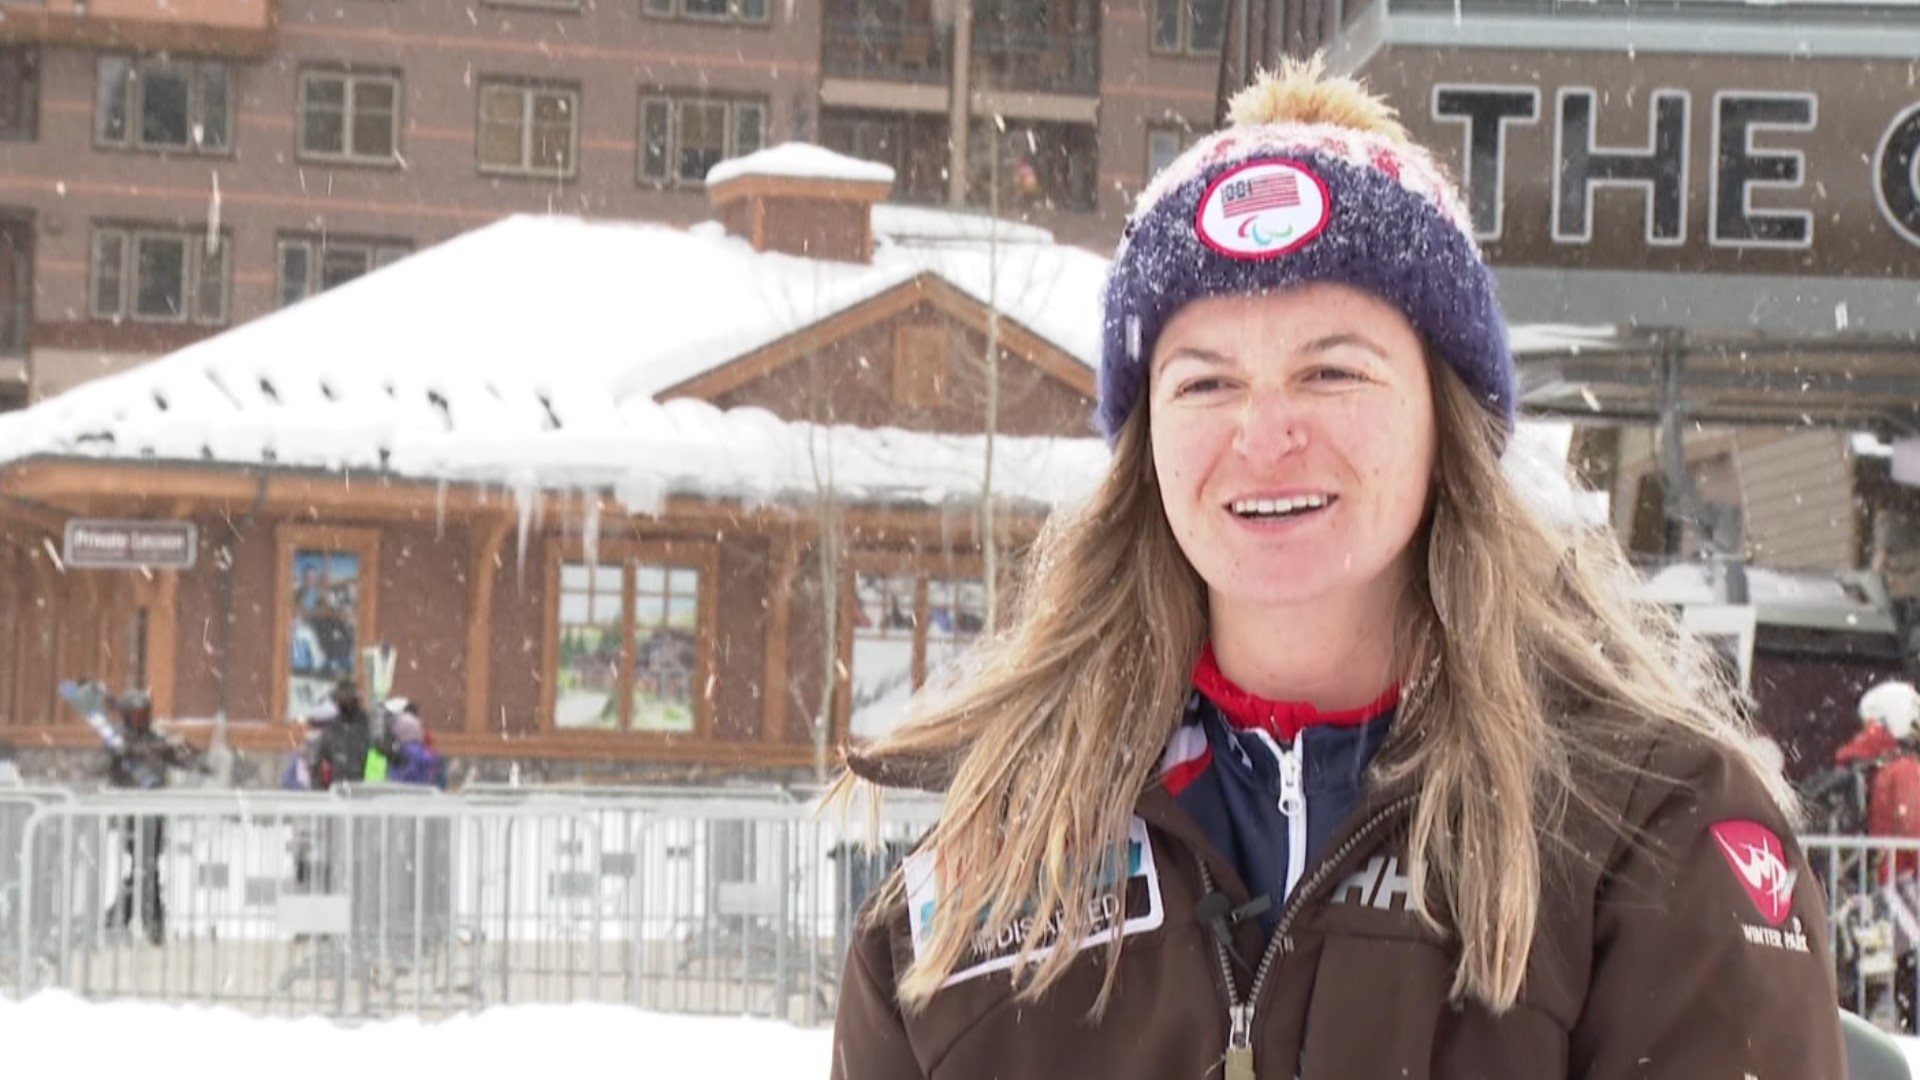 Coming off of her first Paralympic Games in Beijing 2022 and being named to the US Para Alpine team, Allie Johnson is encouraging more girls to pick up ski racing.